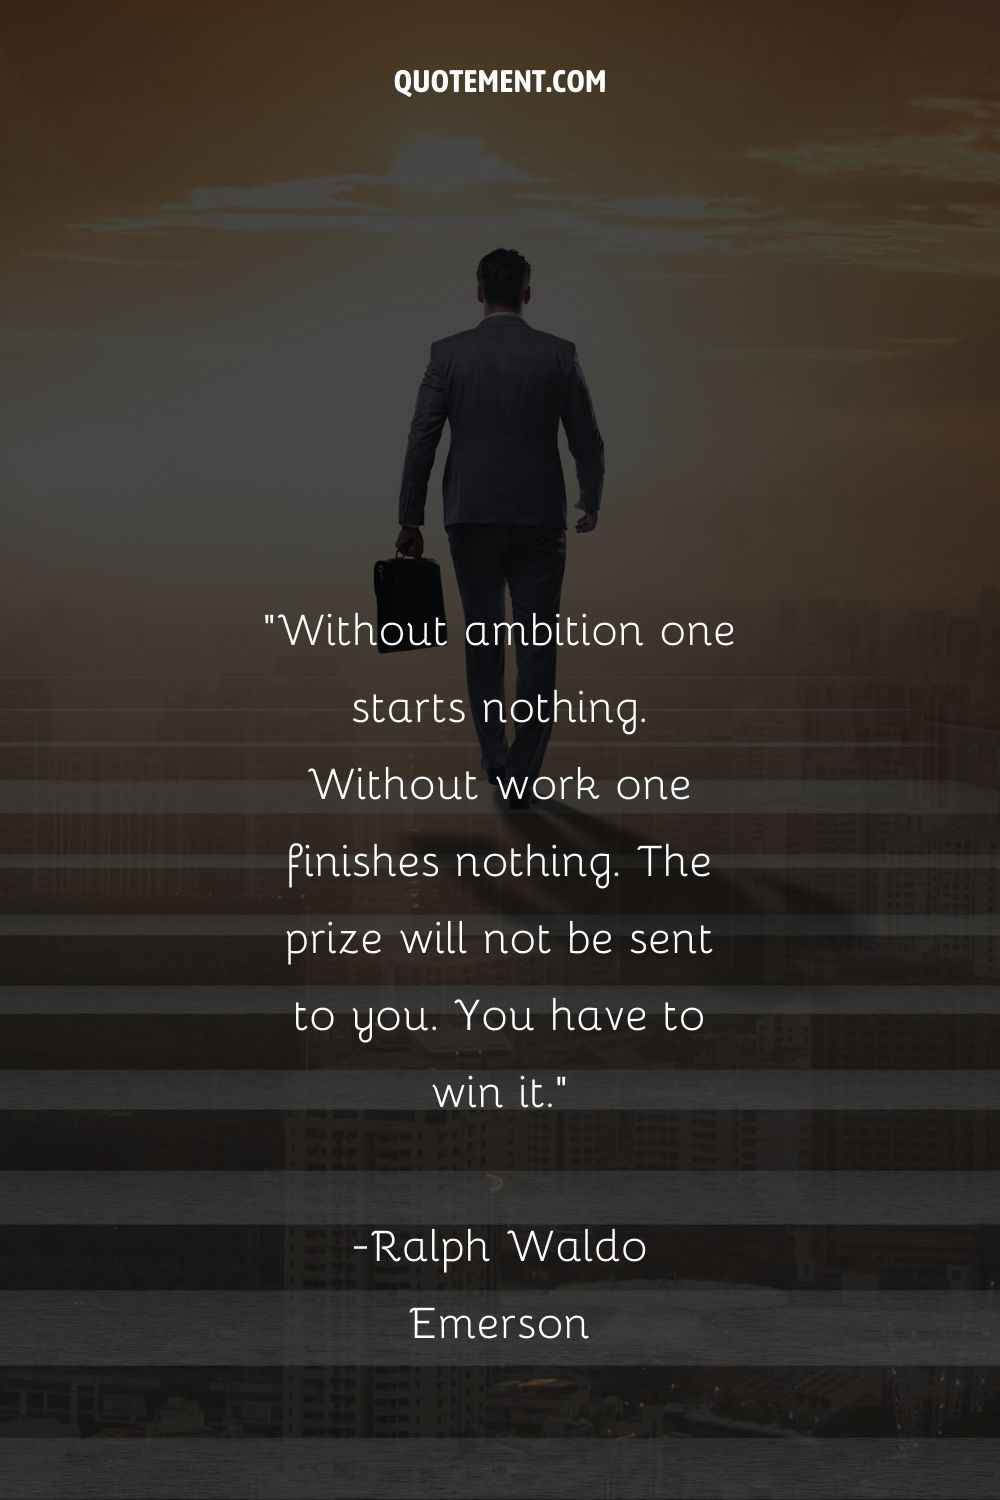 Without ambition one starts nothing. Without work one finishes nothing.